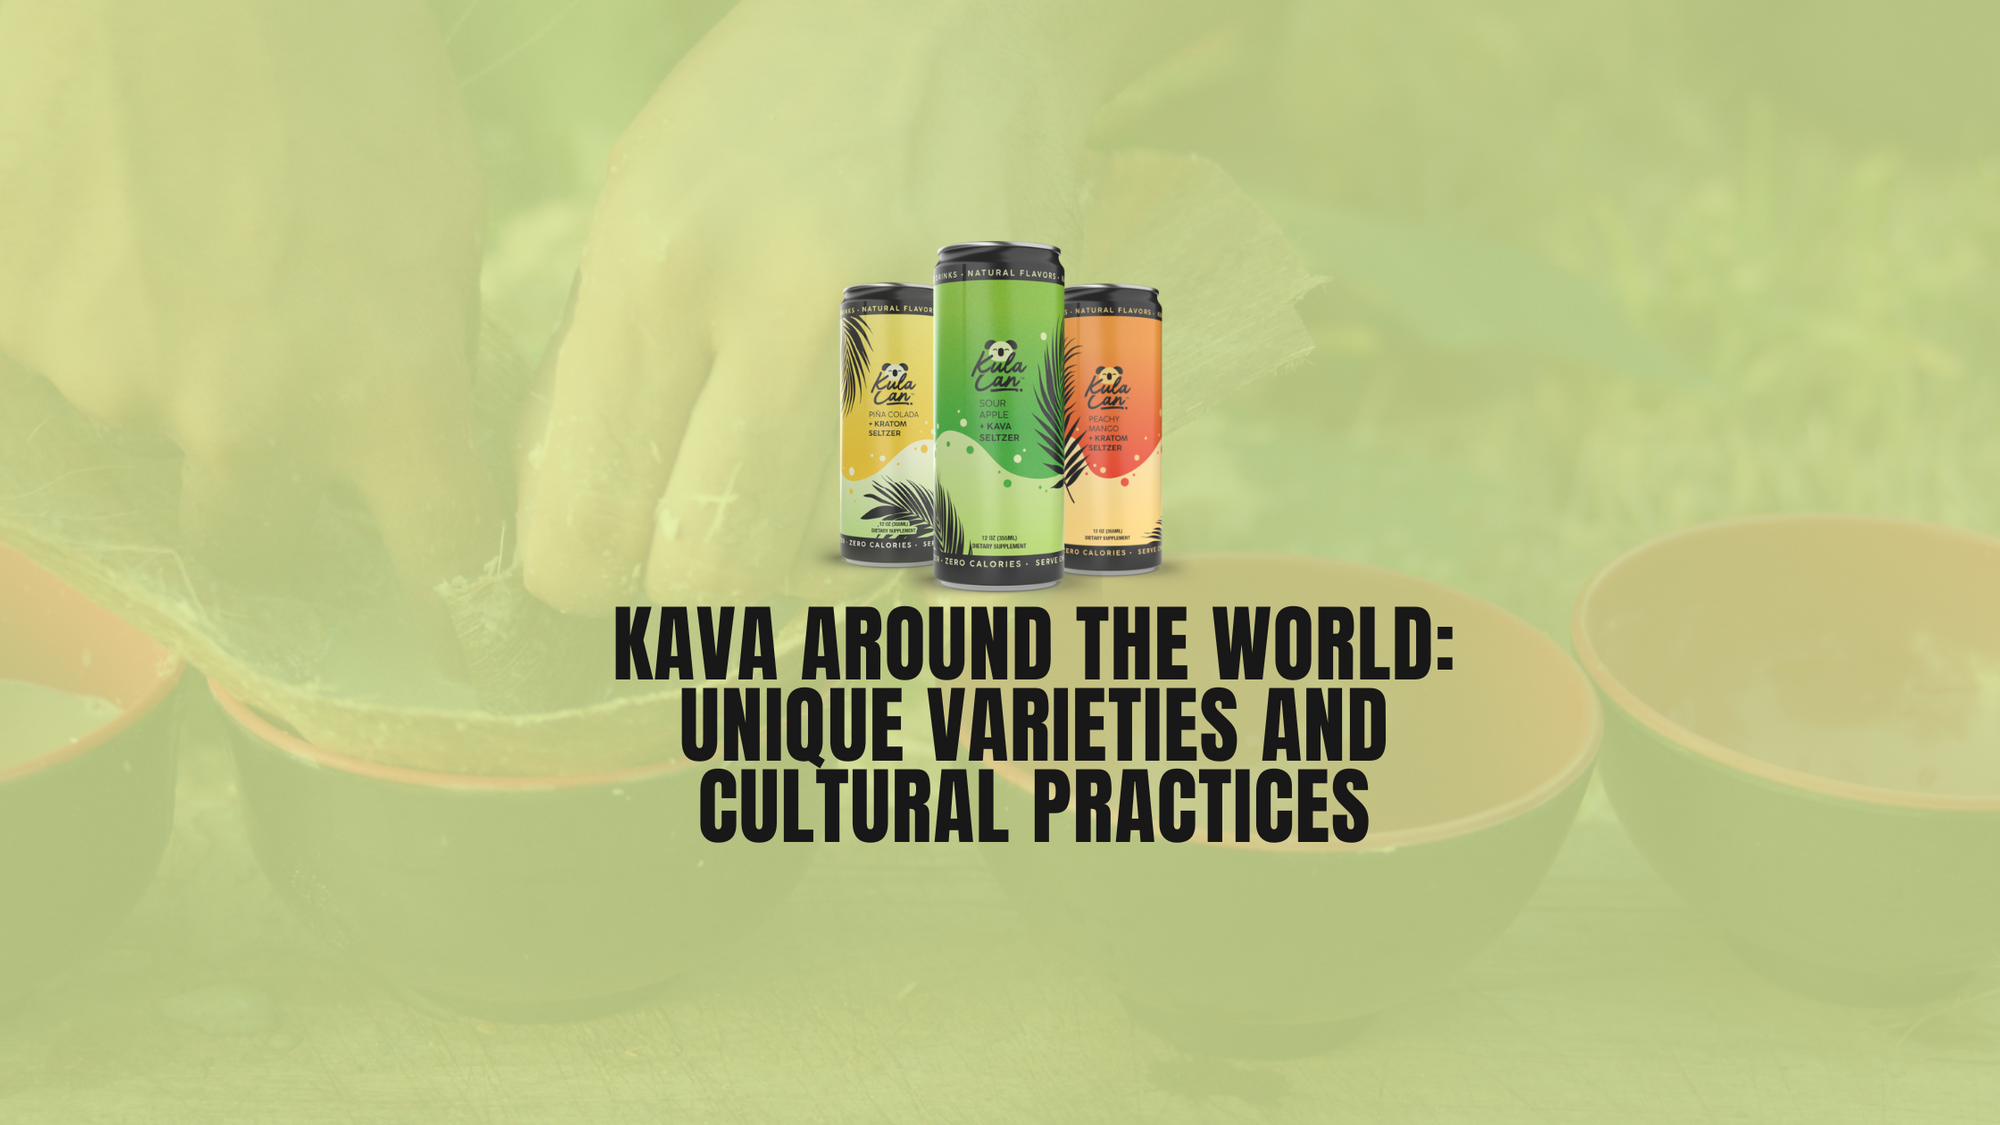 Kava Around the World: Unique Varieties and Cultural Practices